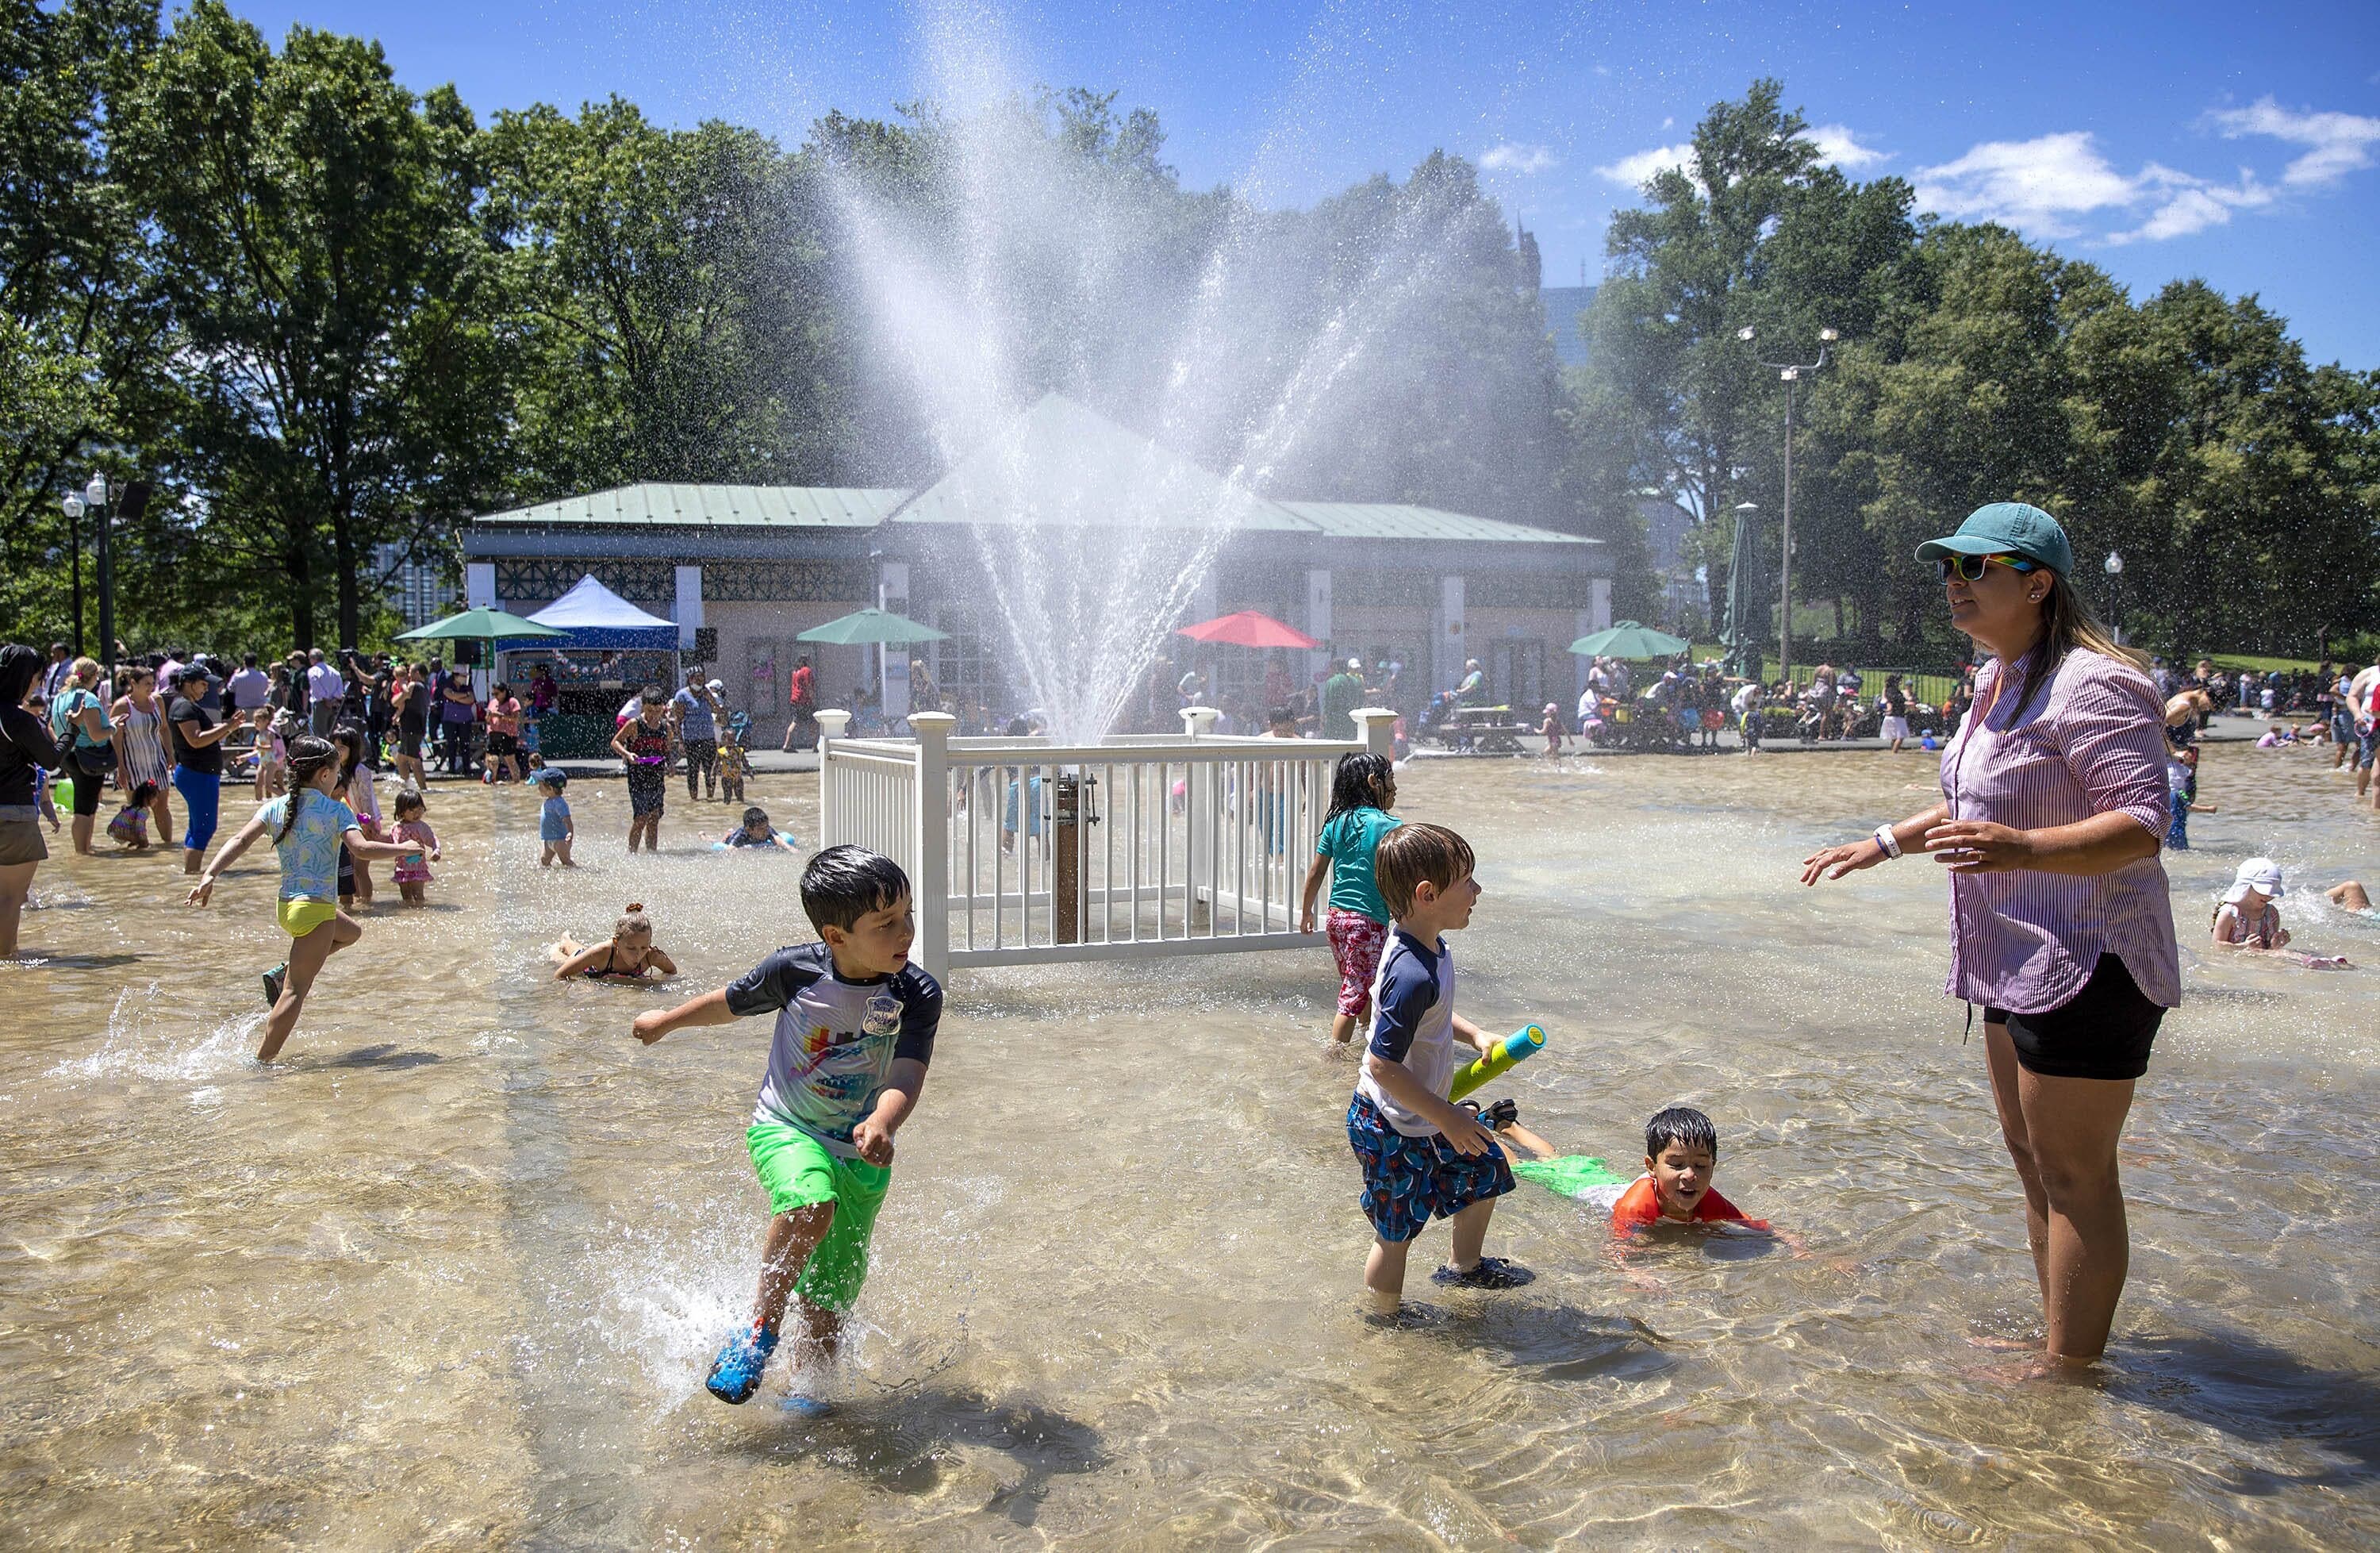 Children splash through the water by the fountain at the summer opening of Boston's Frog Pond.